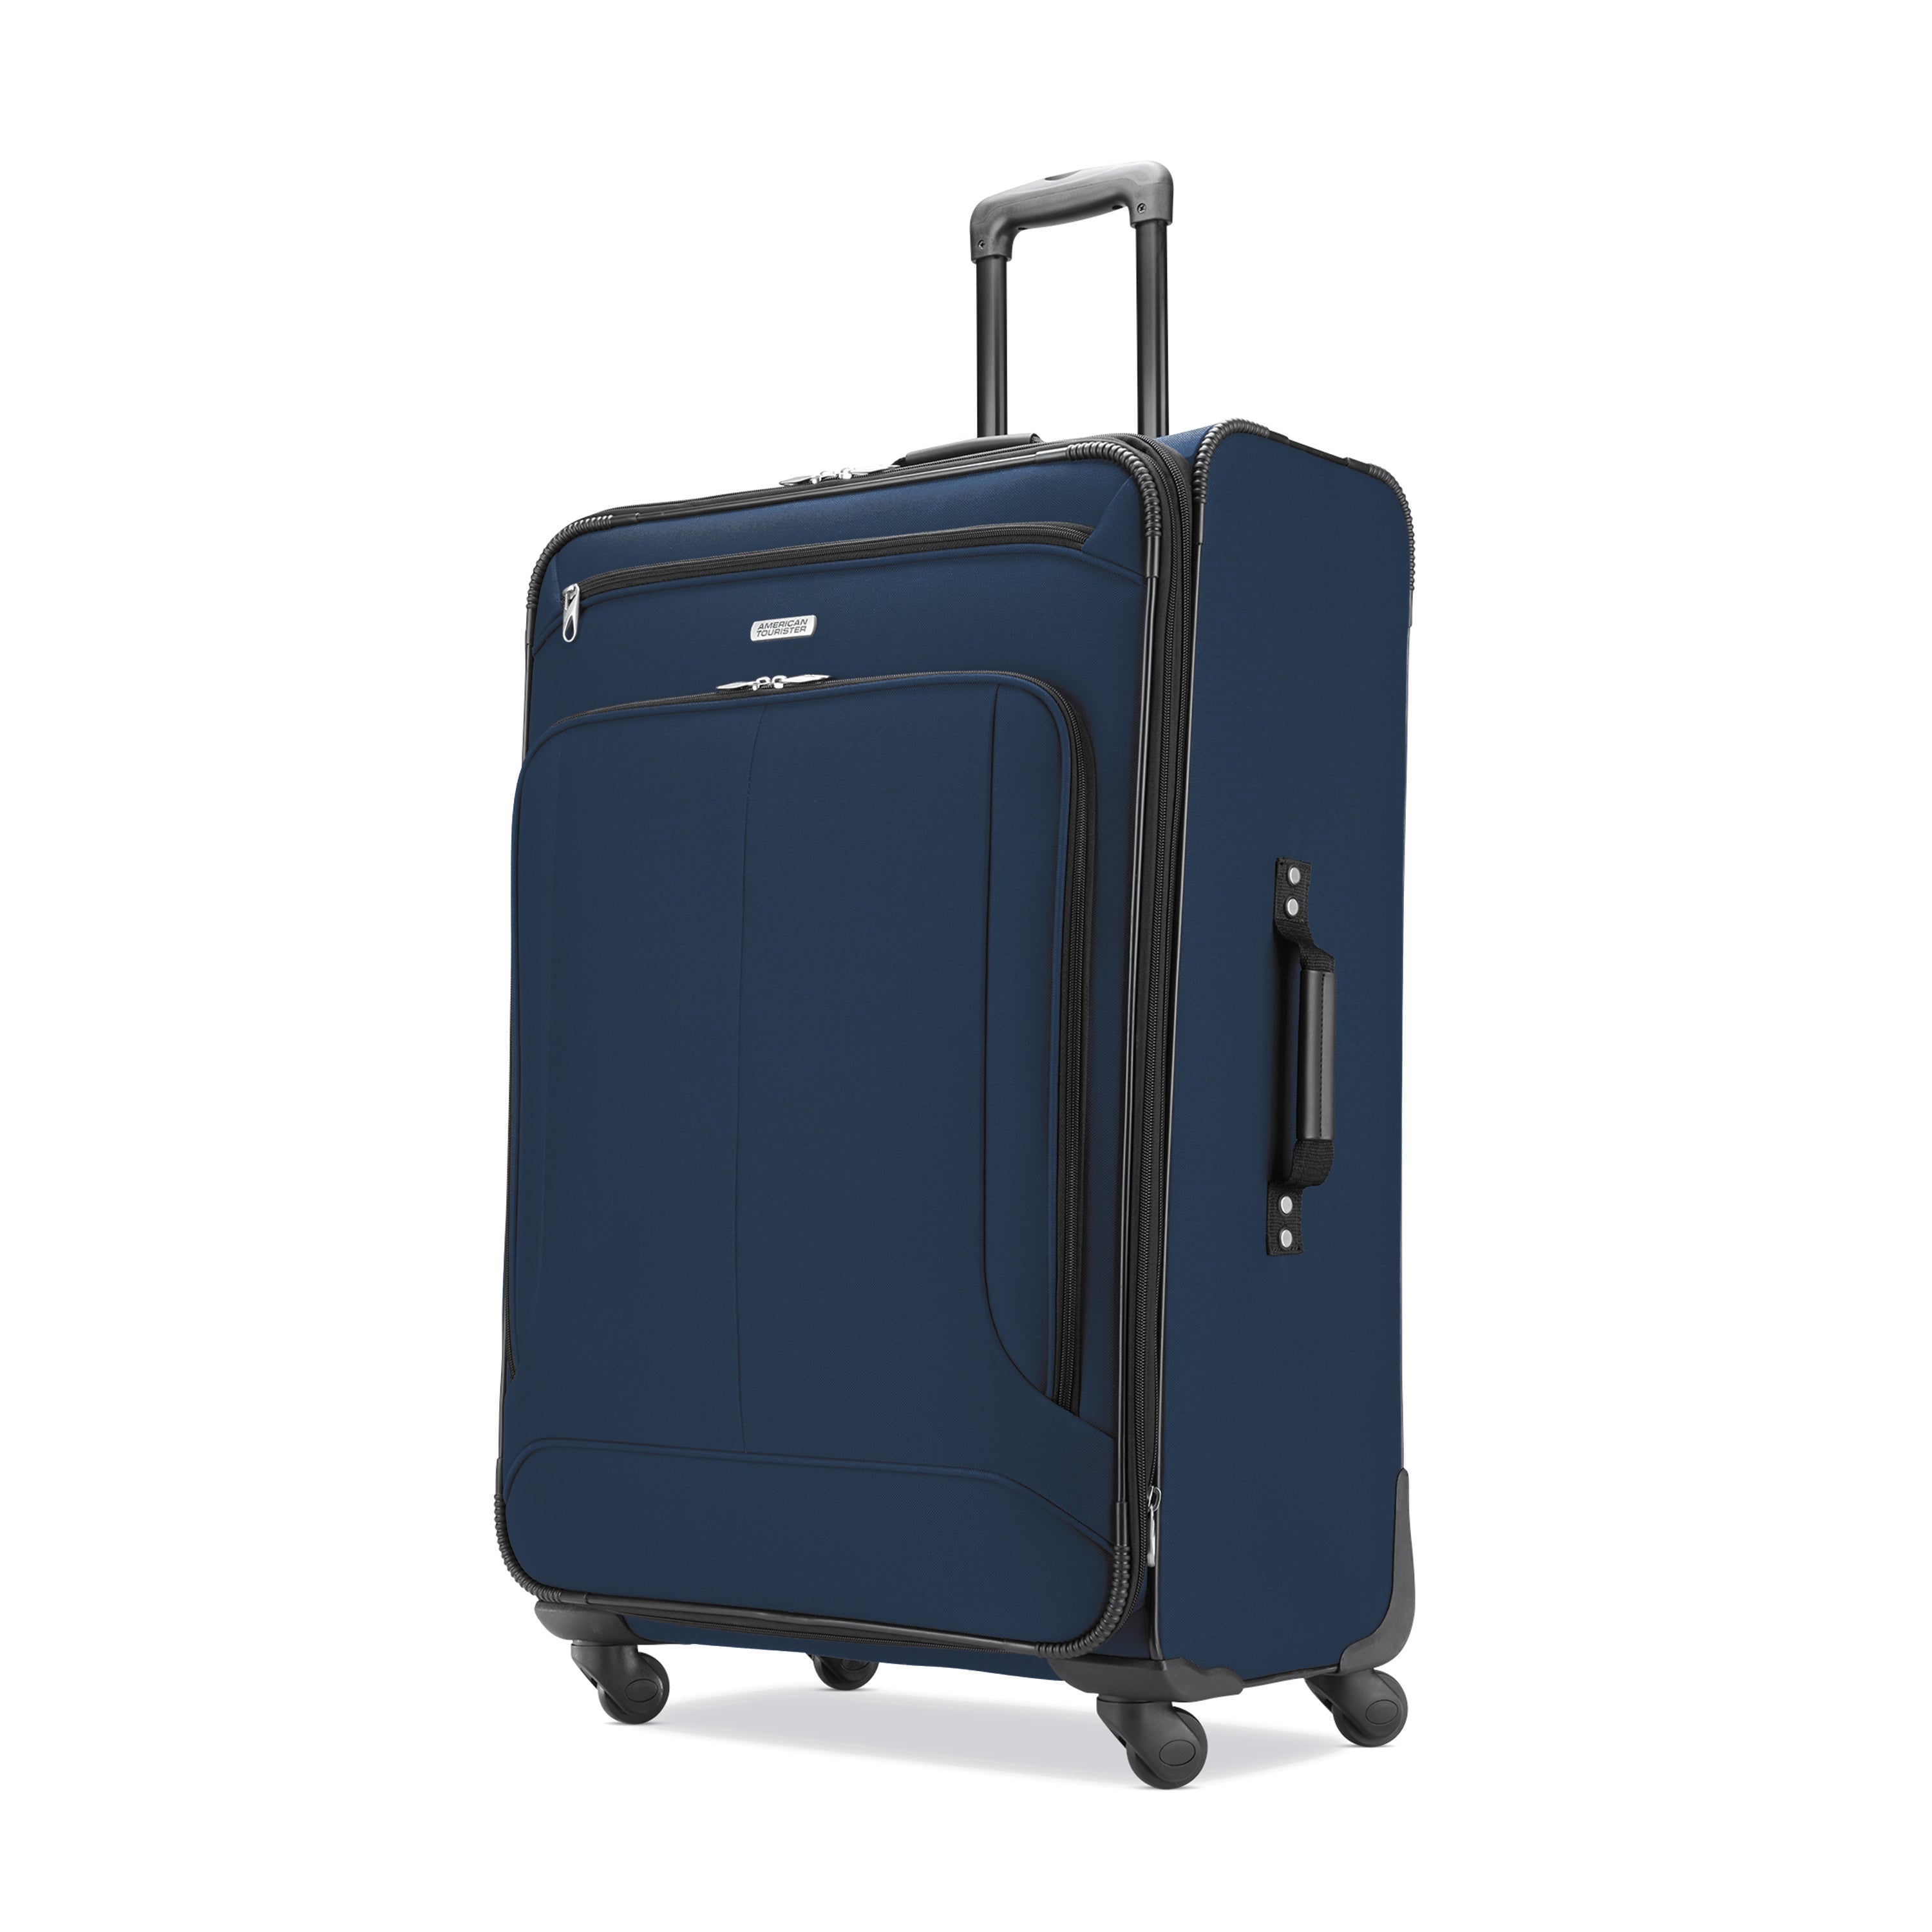 American Tourister Pop Max Softside Luggage with Spinner Wheels, Navy, 3-Piece Set (21/25/29)